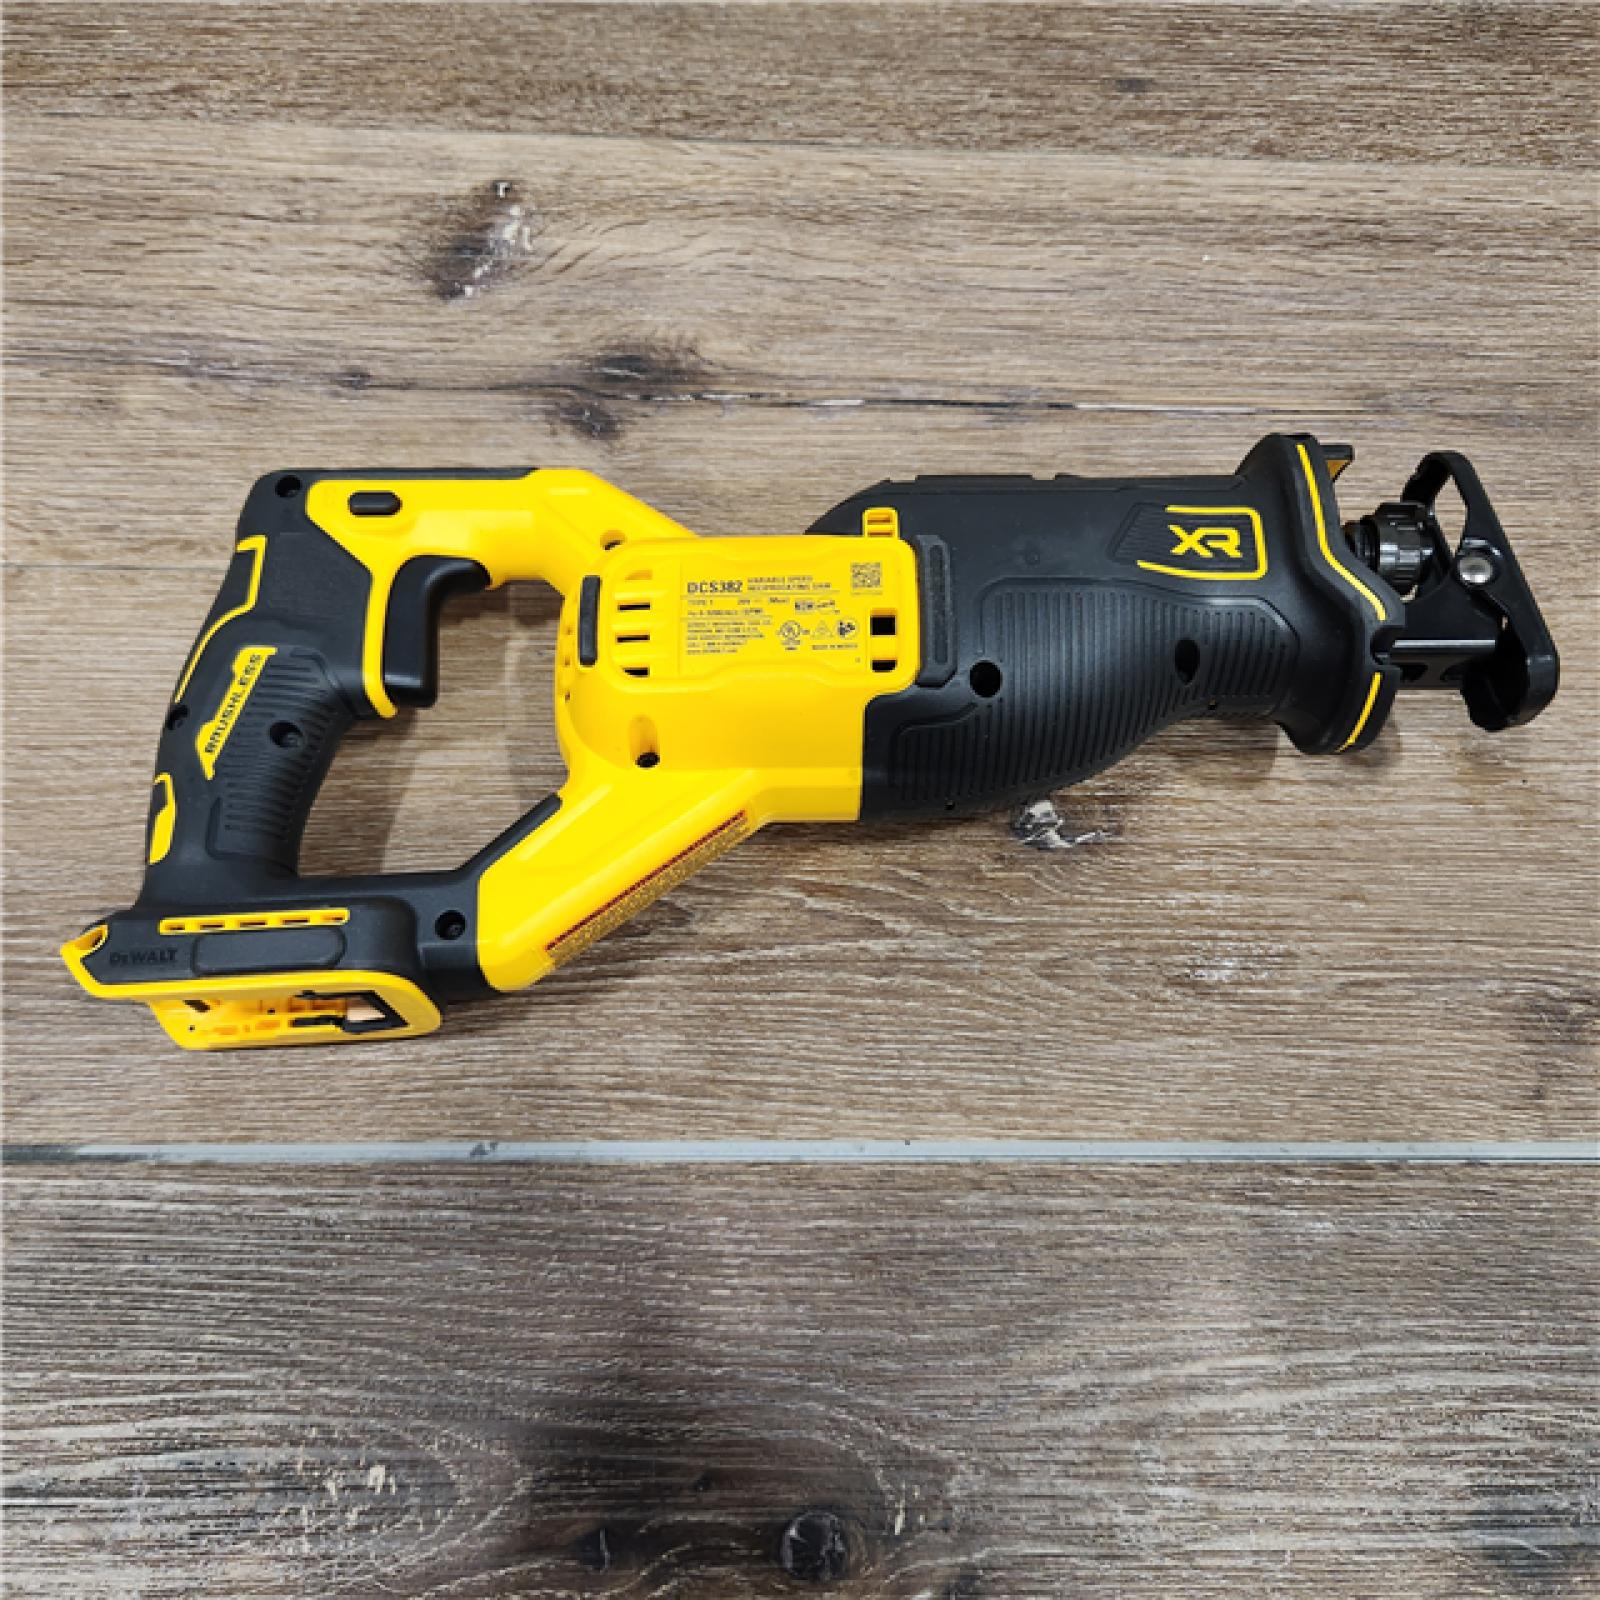 AS-IS Dewalt DCS382B 20V MAX XR Cordless Brushless Reciprocating Saw (Bare Tool)